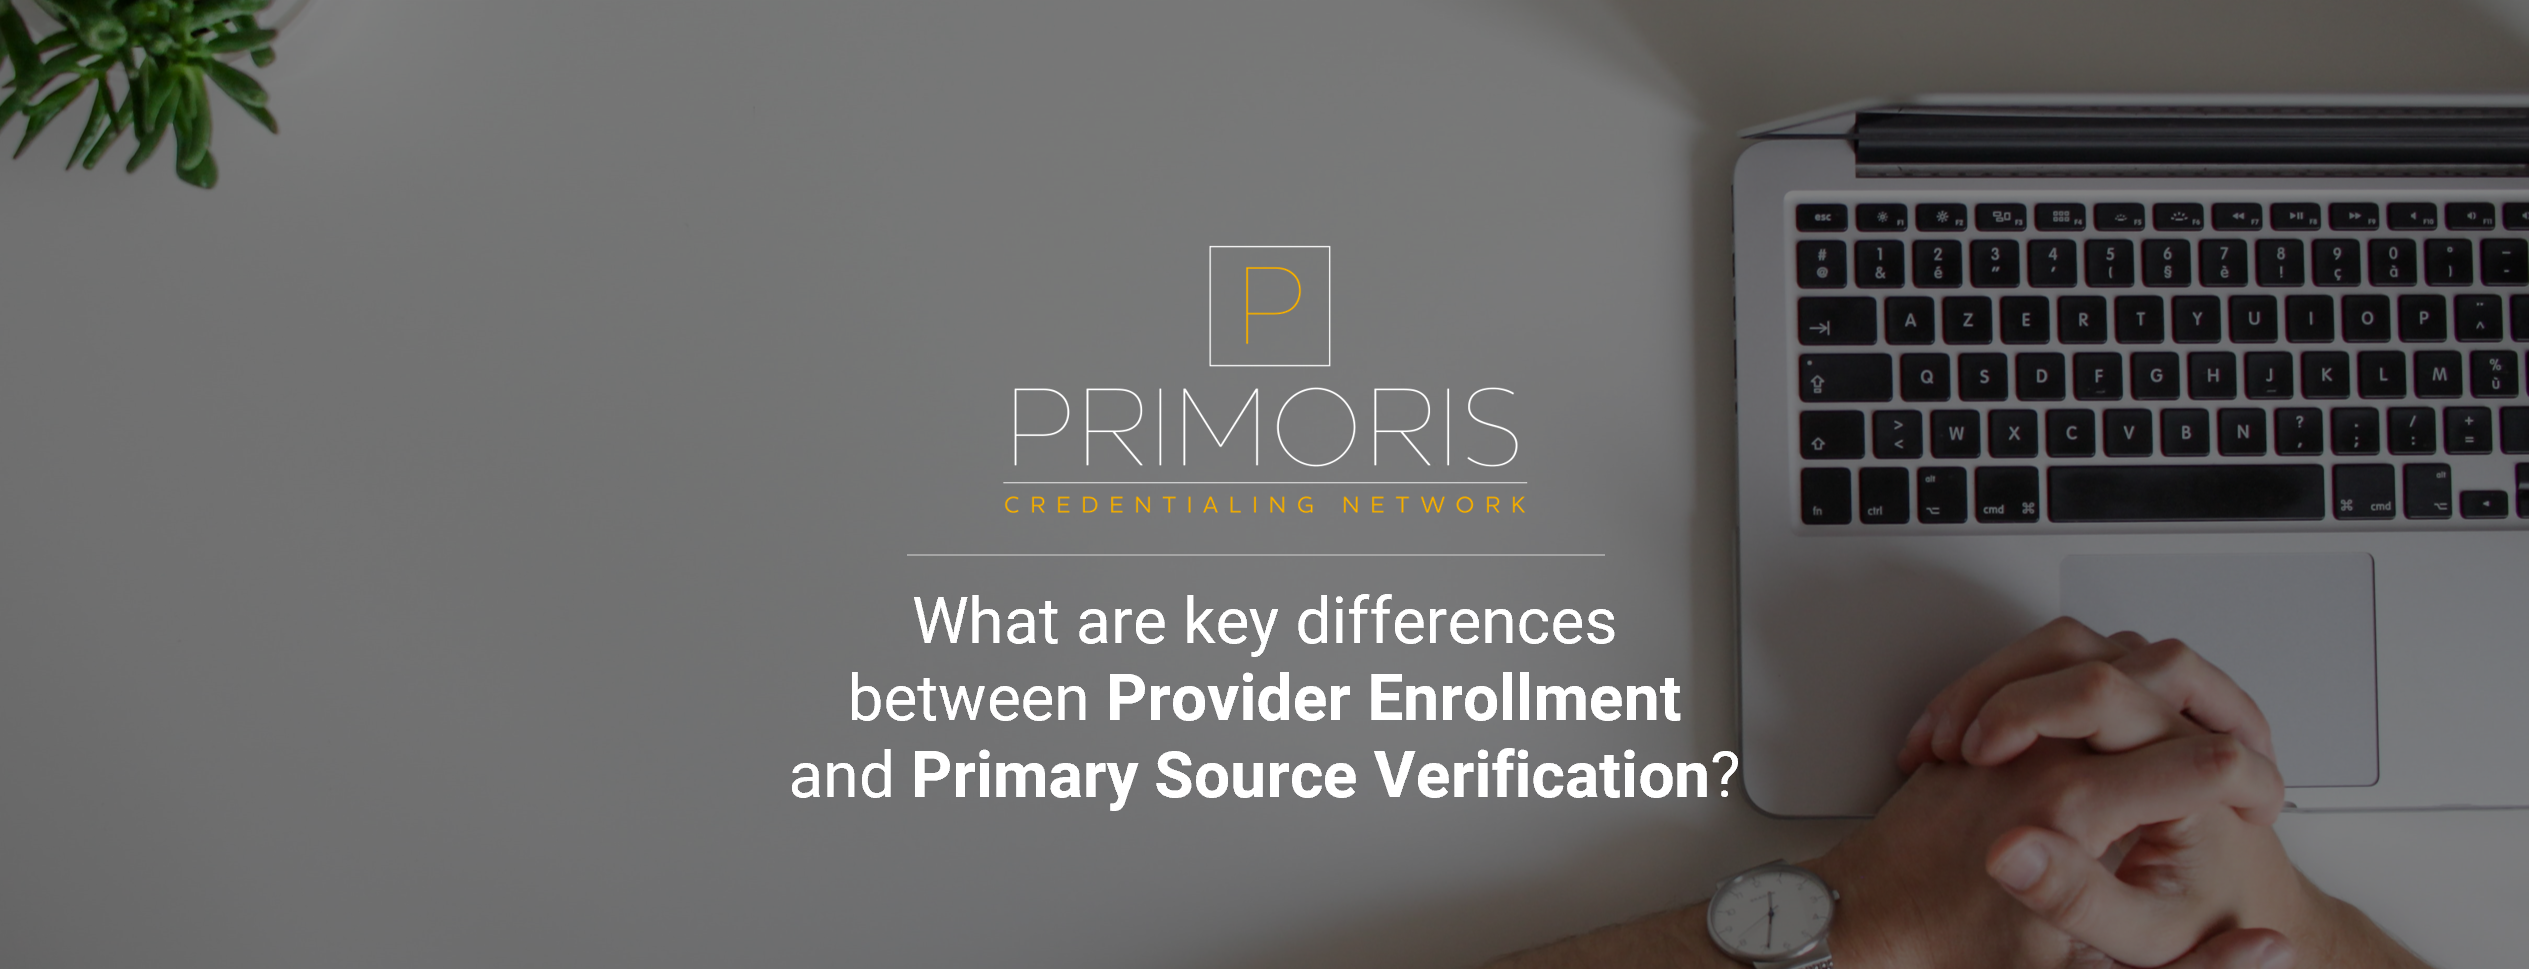 Provider Enrollment and Primary Source Verification Key Differences